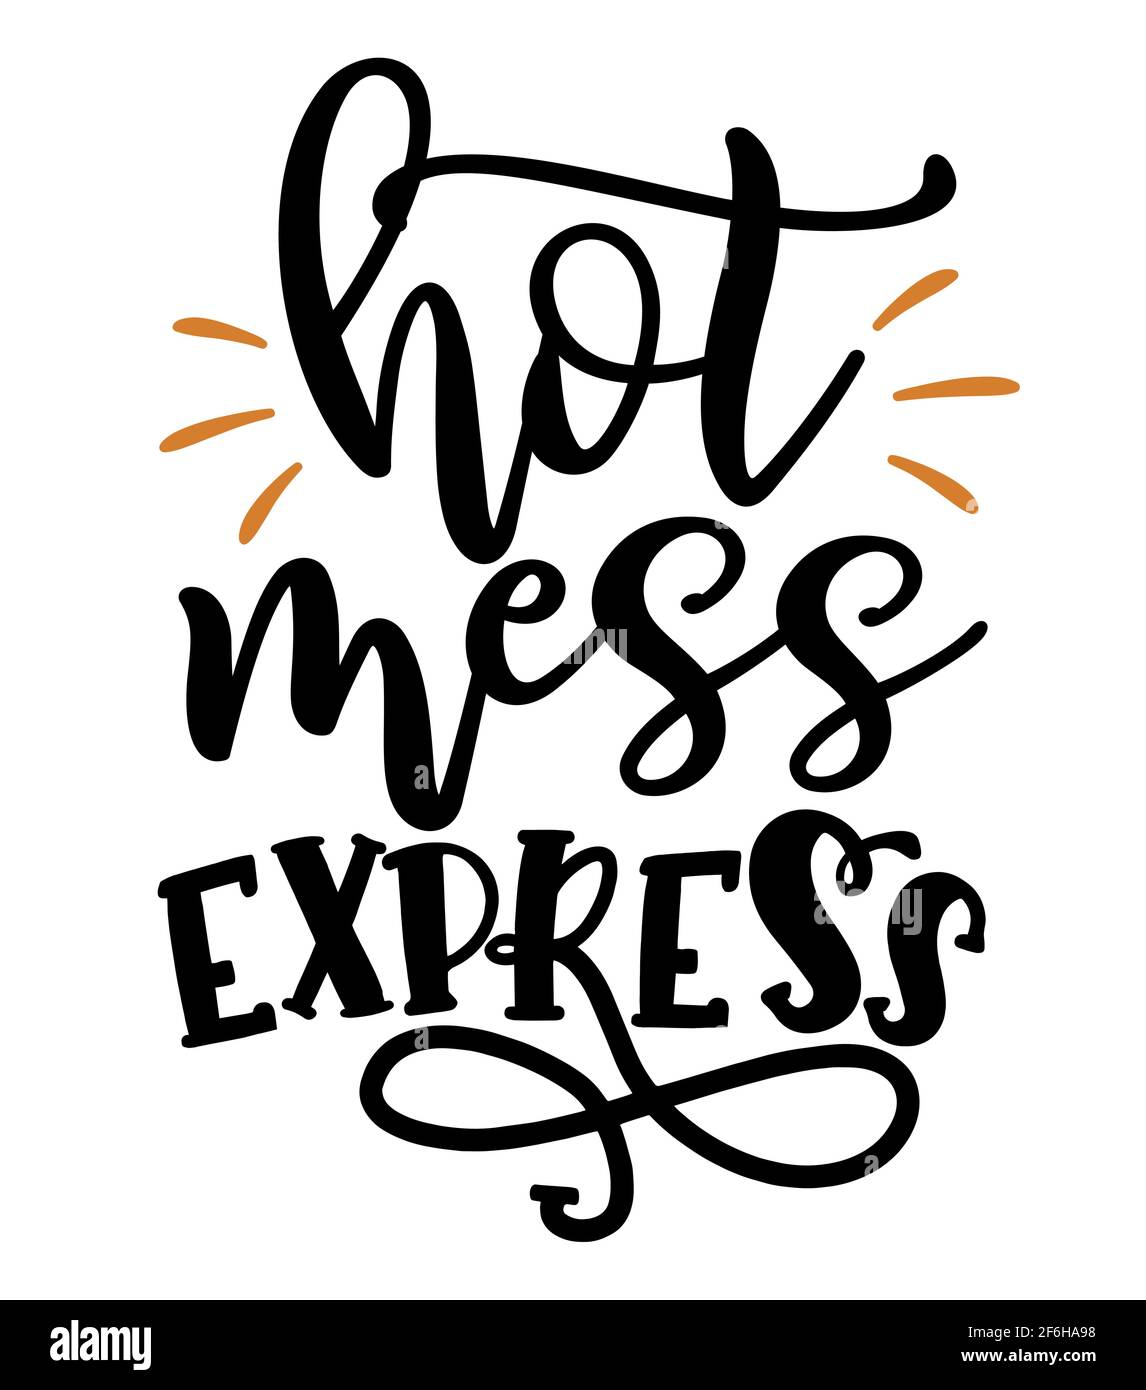 Hot mess express - lettering message. 